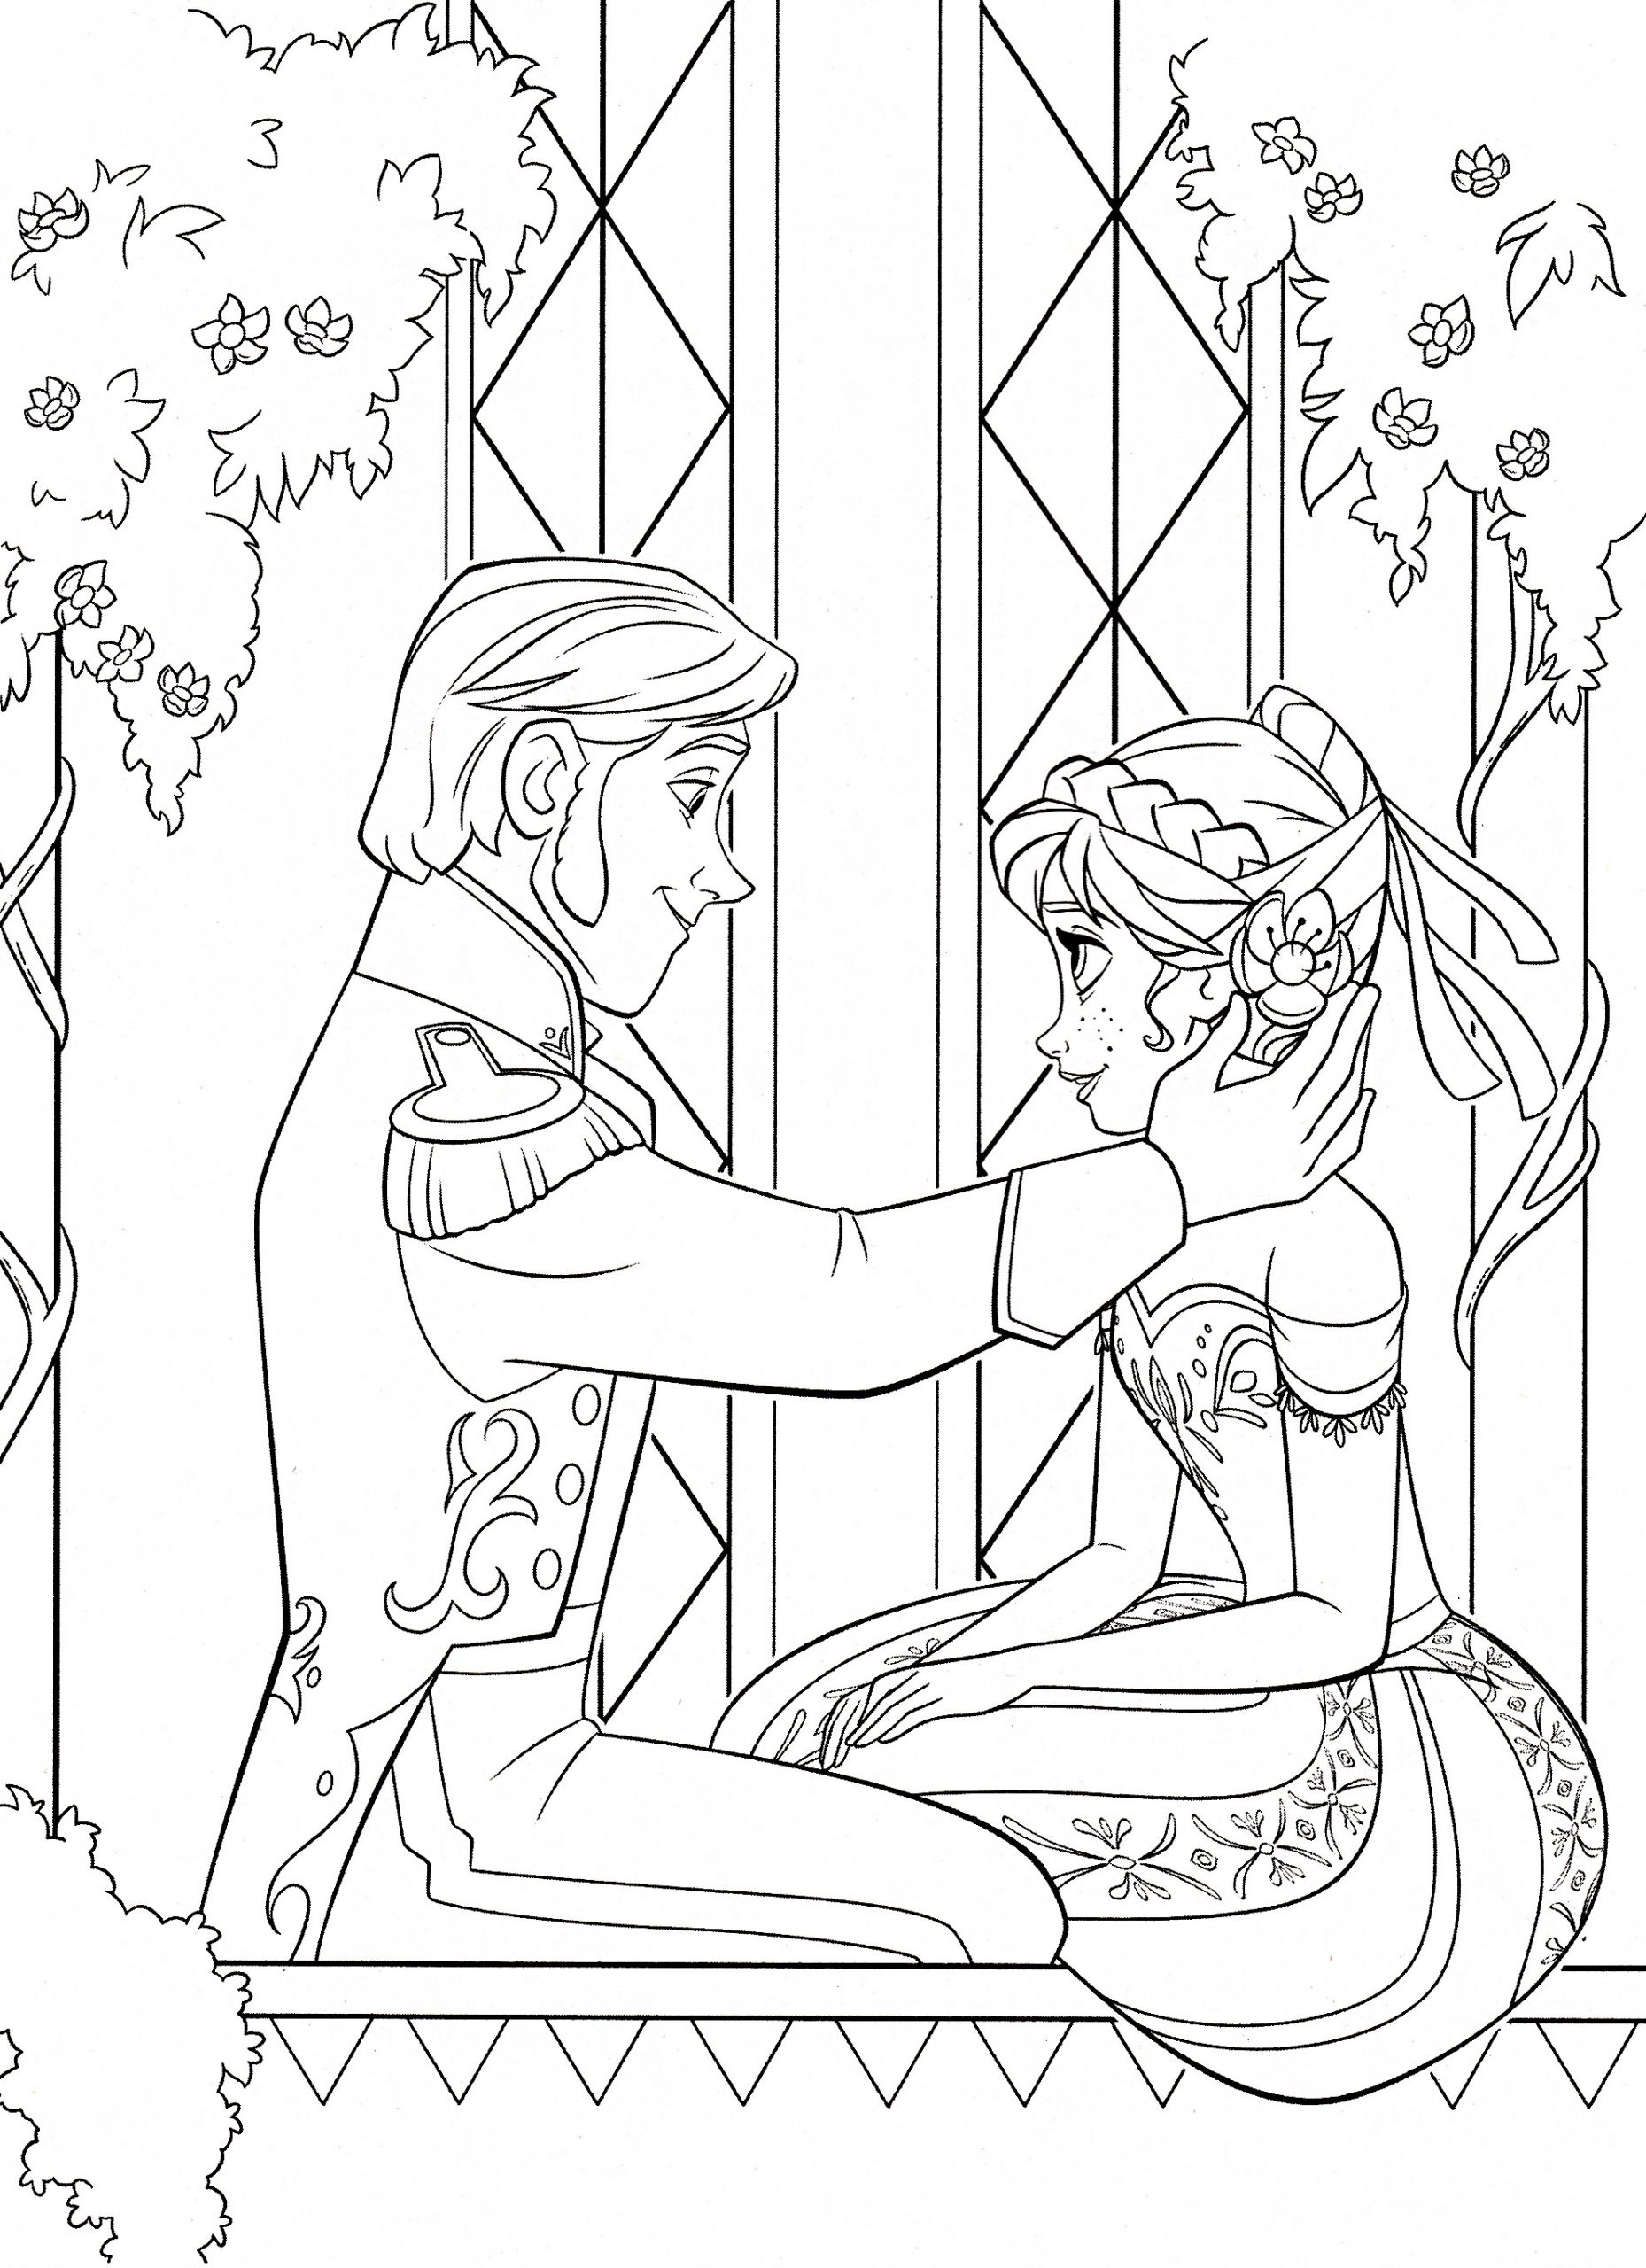 Frozen Coloring Pages Free Printable
 Disney’s Frozen Colouring Pages